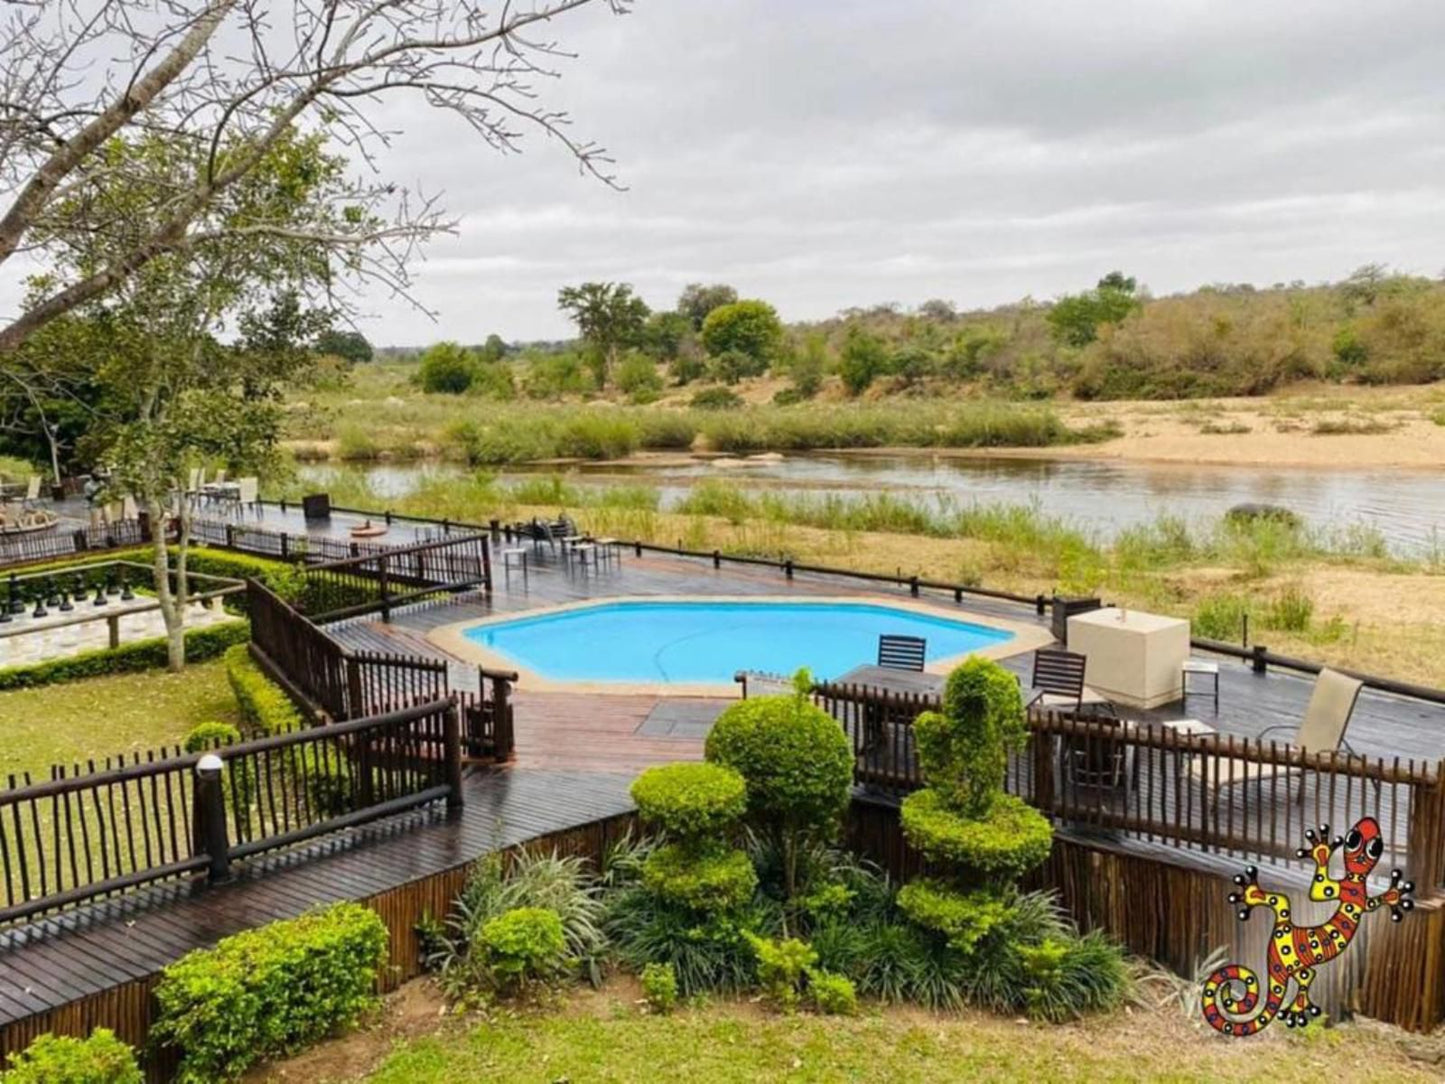 Sabie River Bush Lodge South Kruger Park Mpumalanga South Africa River, Nature, Waters, Garden, Plant, Swimming Pool